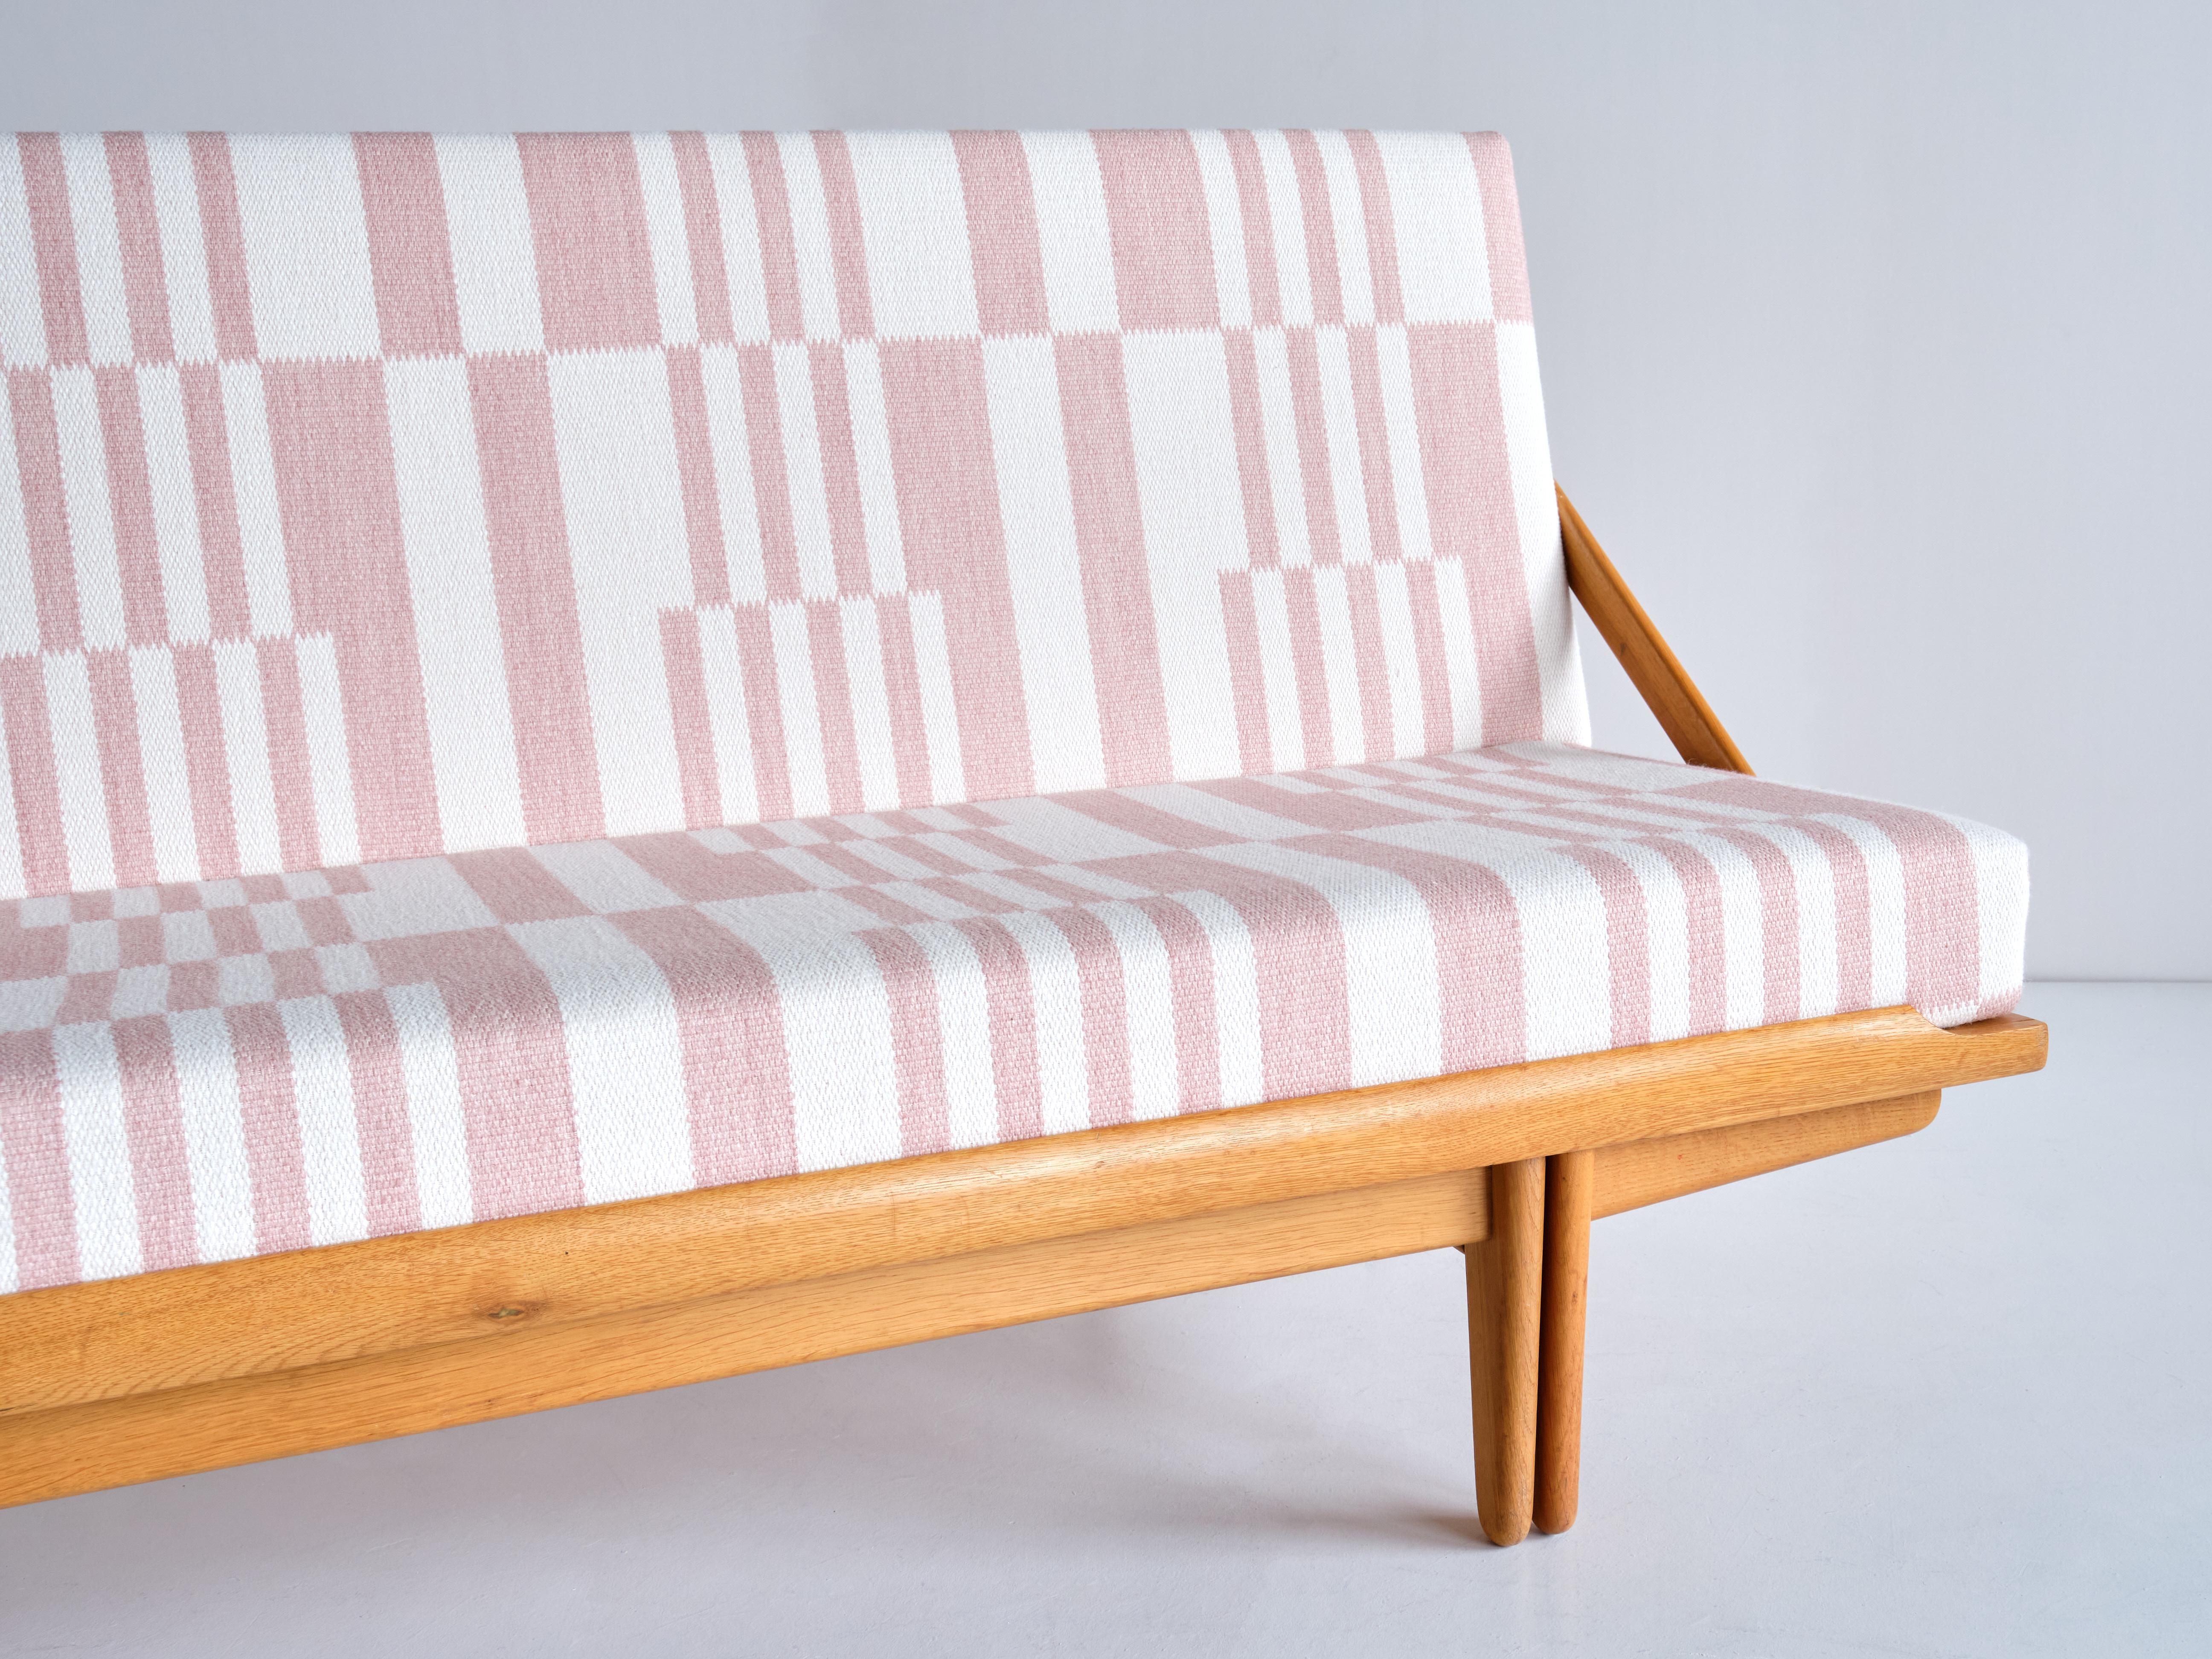 Poul Volther Sofa / Daybed in Oak and Pierre Frey Fabric, Gemla, Sweden, 1955 For Sale 3